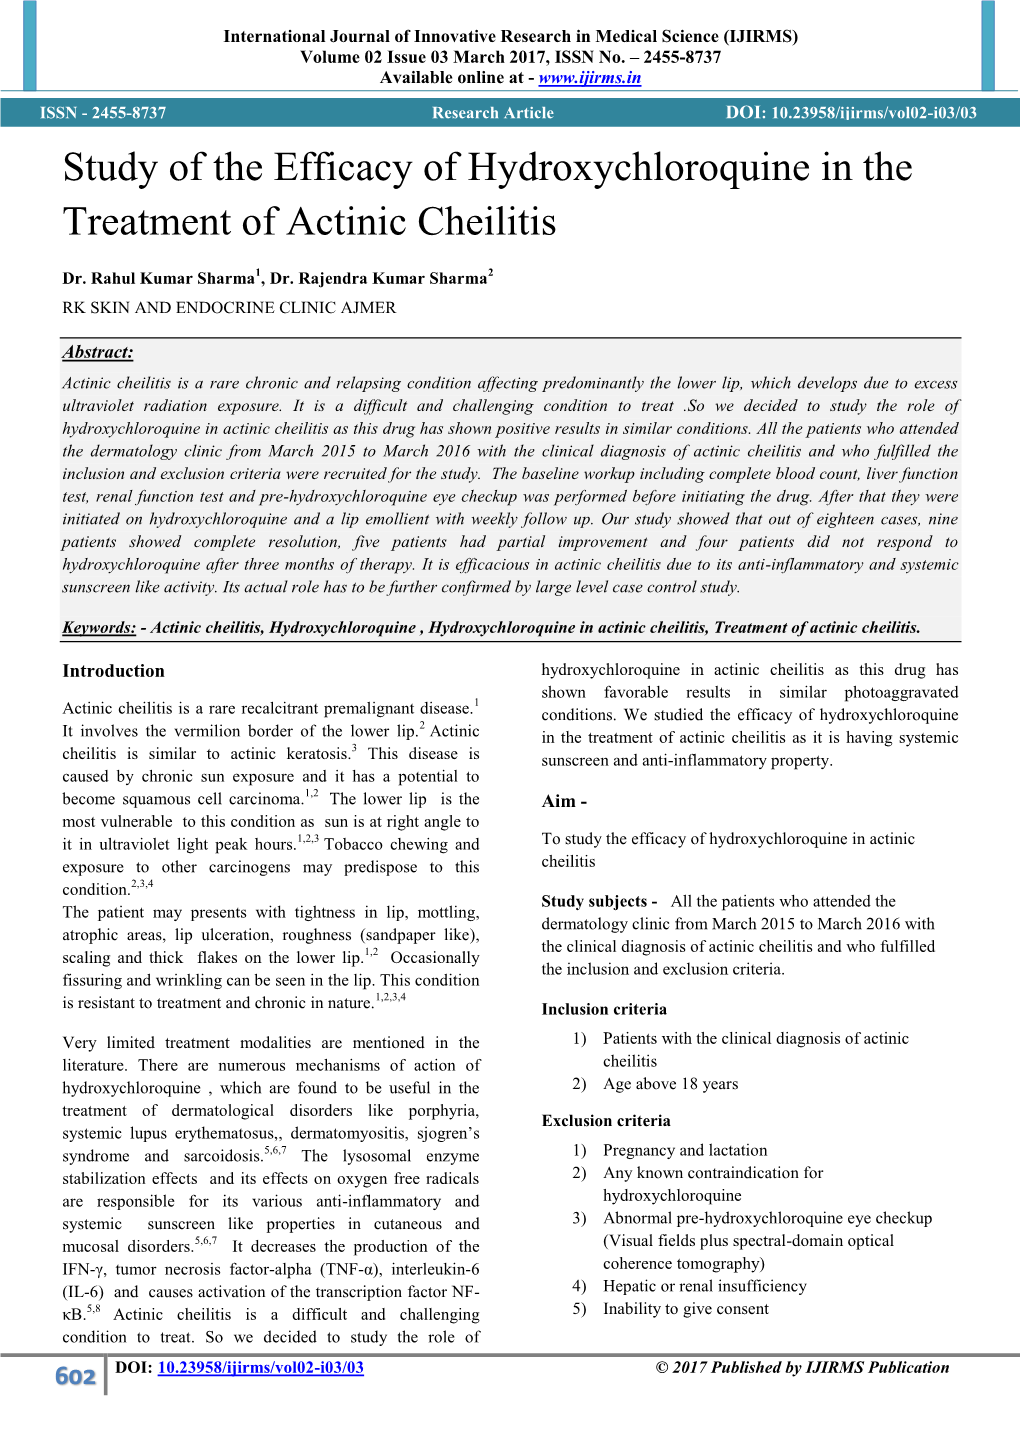 Study of the Efficacy of Hydroxychloroquine in the Treatment of Actinic Cheilitis